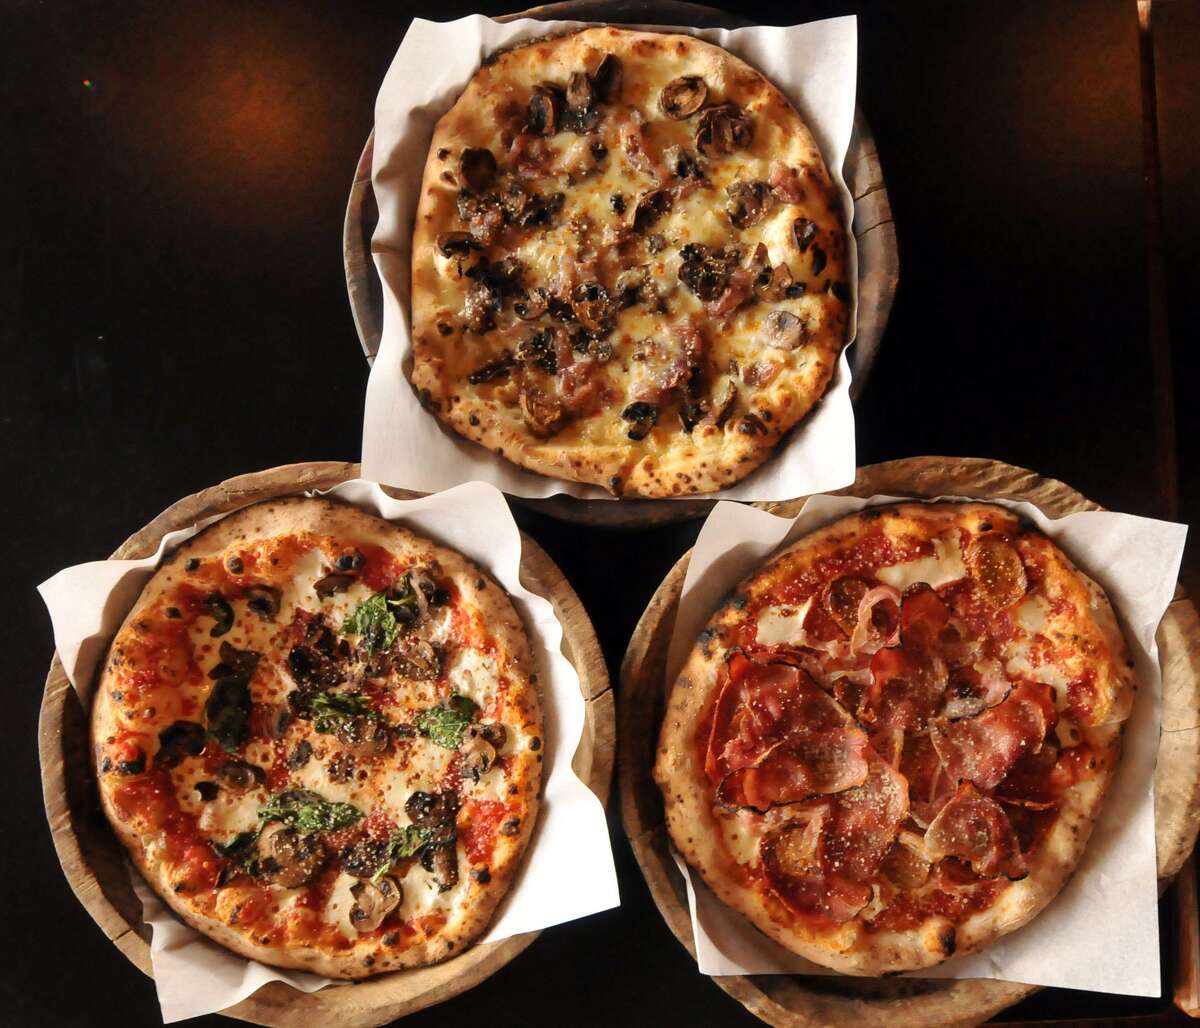 A selection of pies from Dough Pizzeria Napoletana.